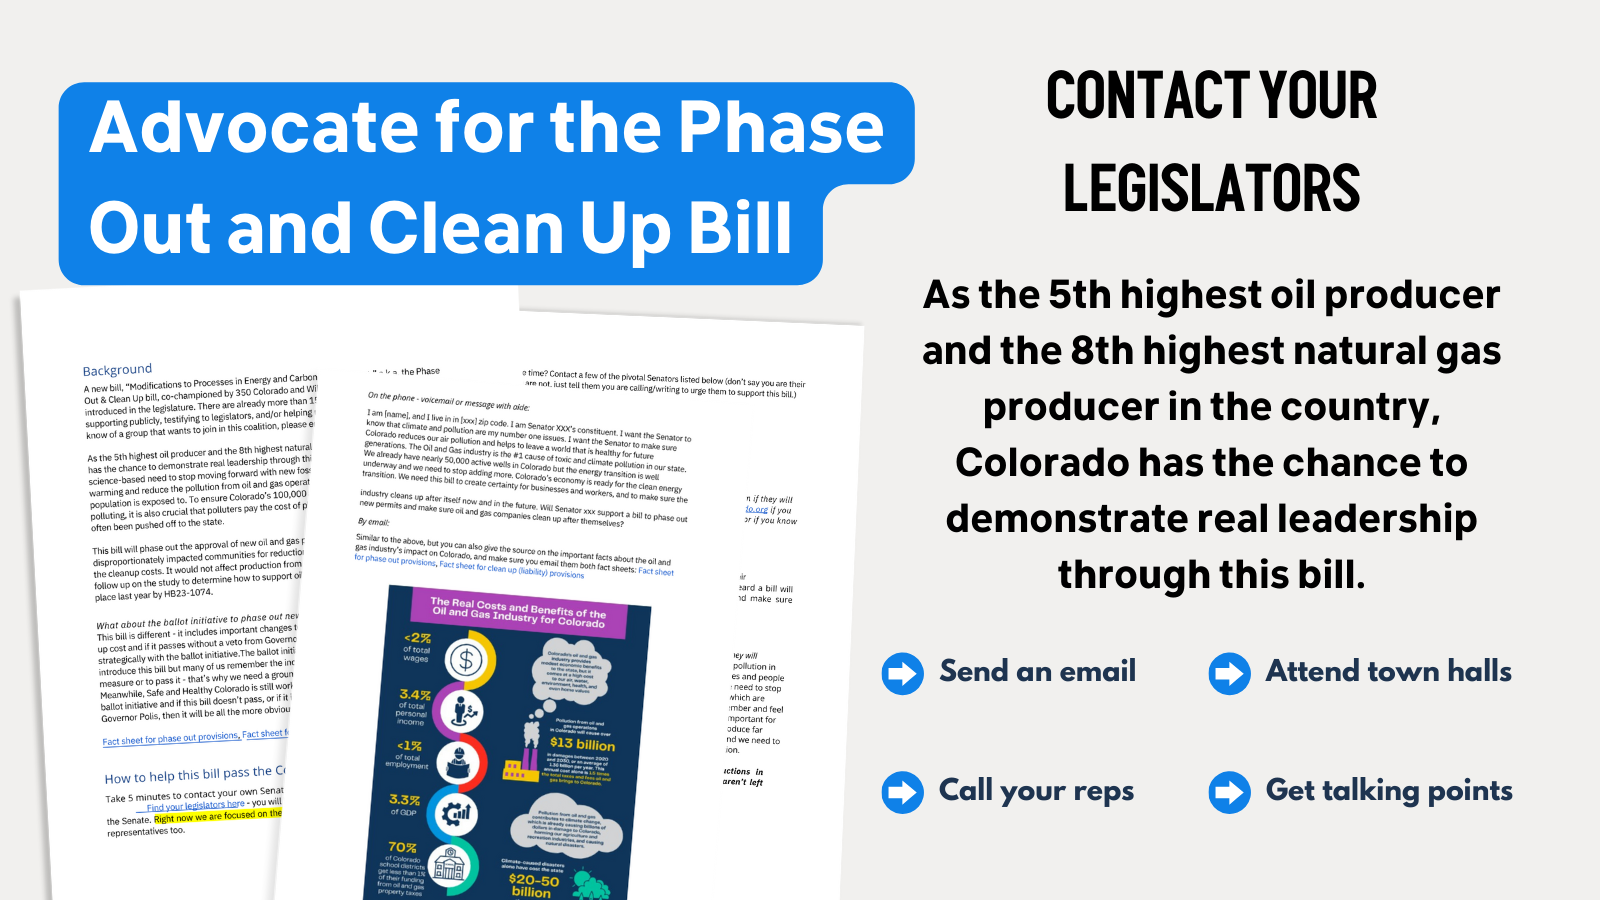 How to advocate for the phase out clean up bill